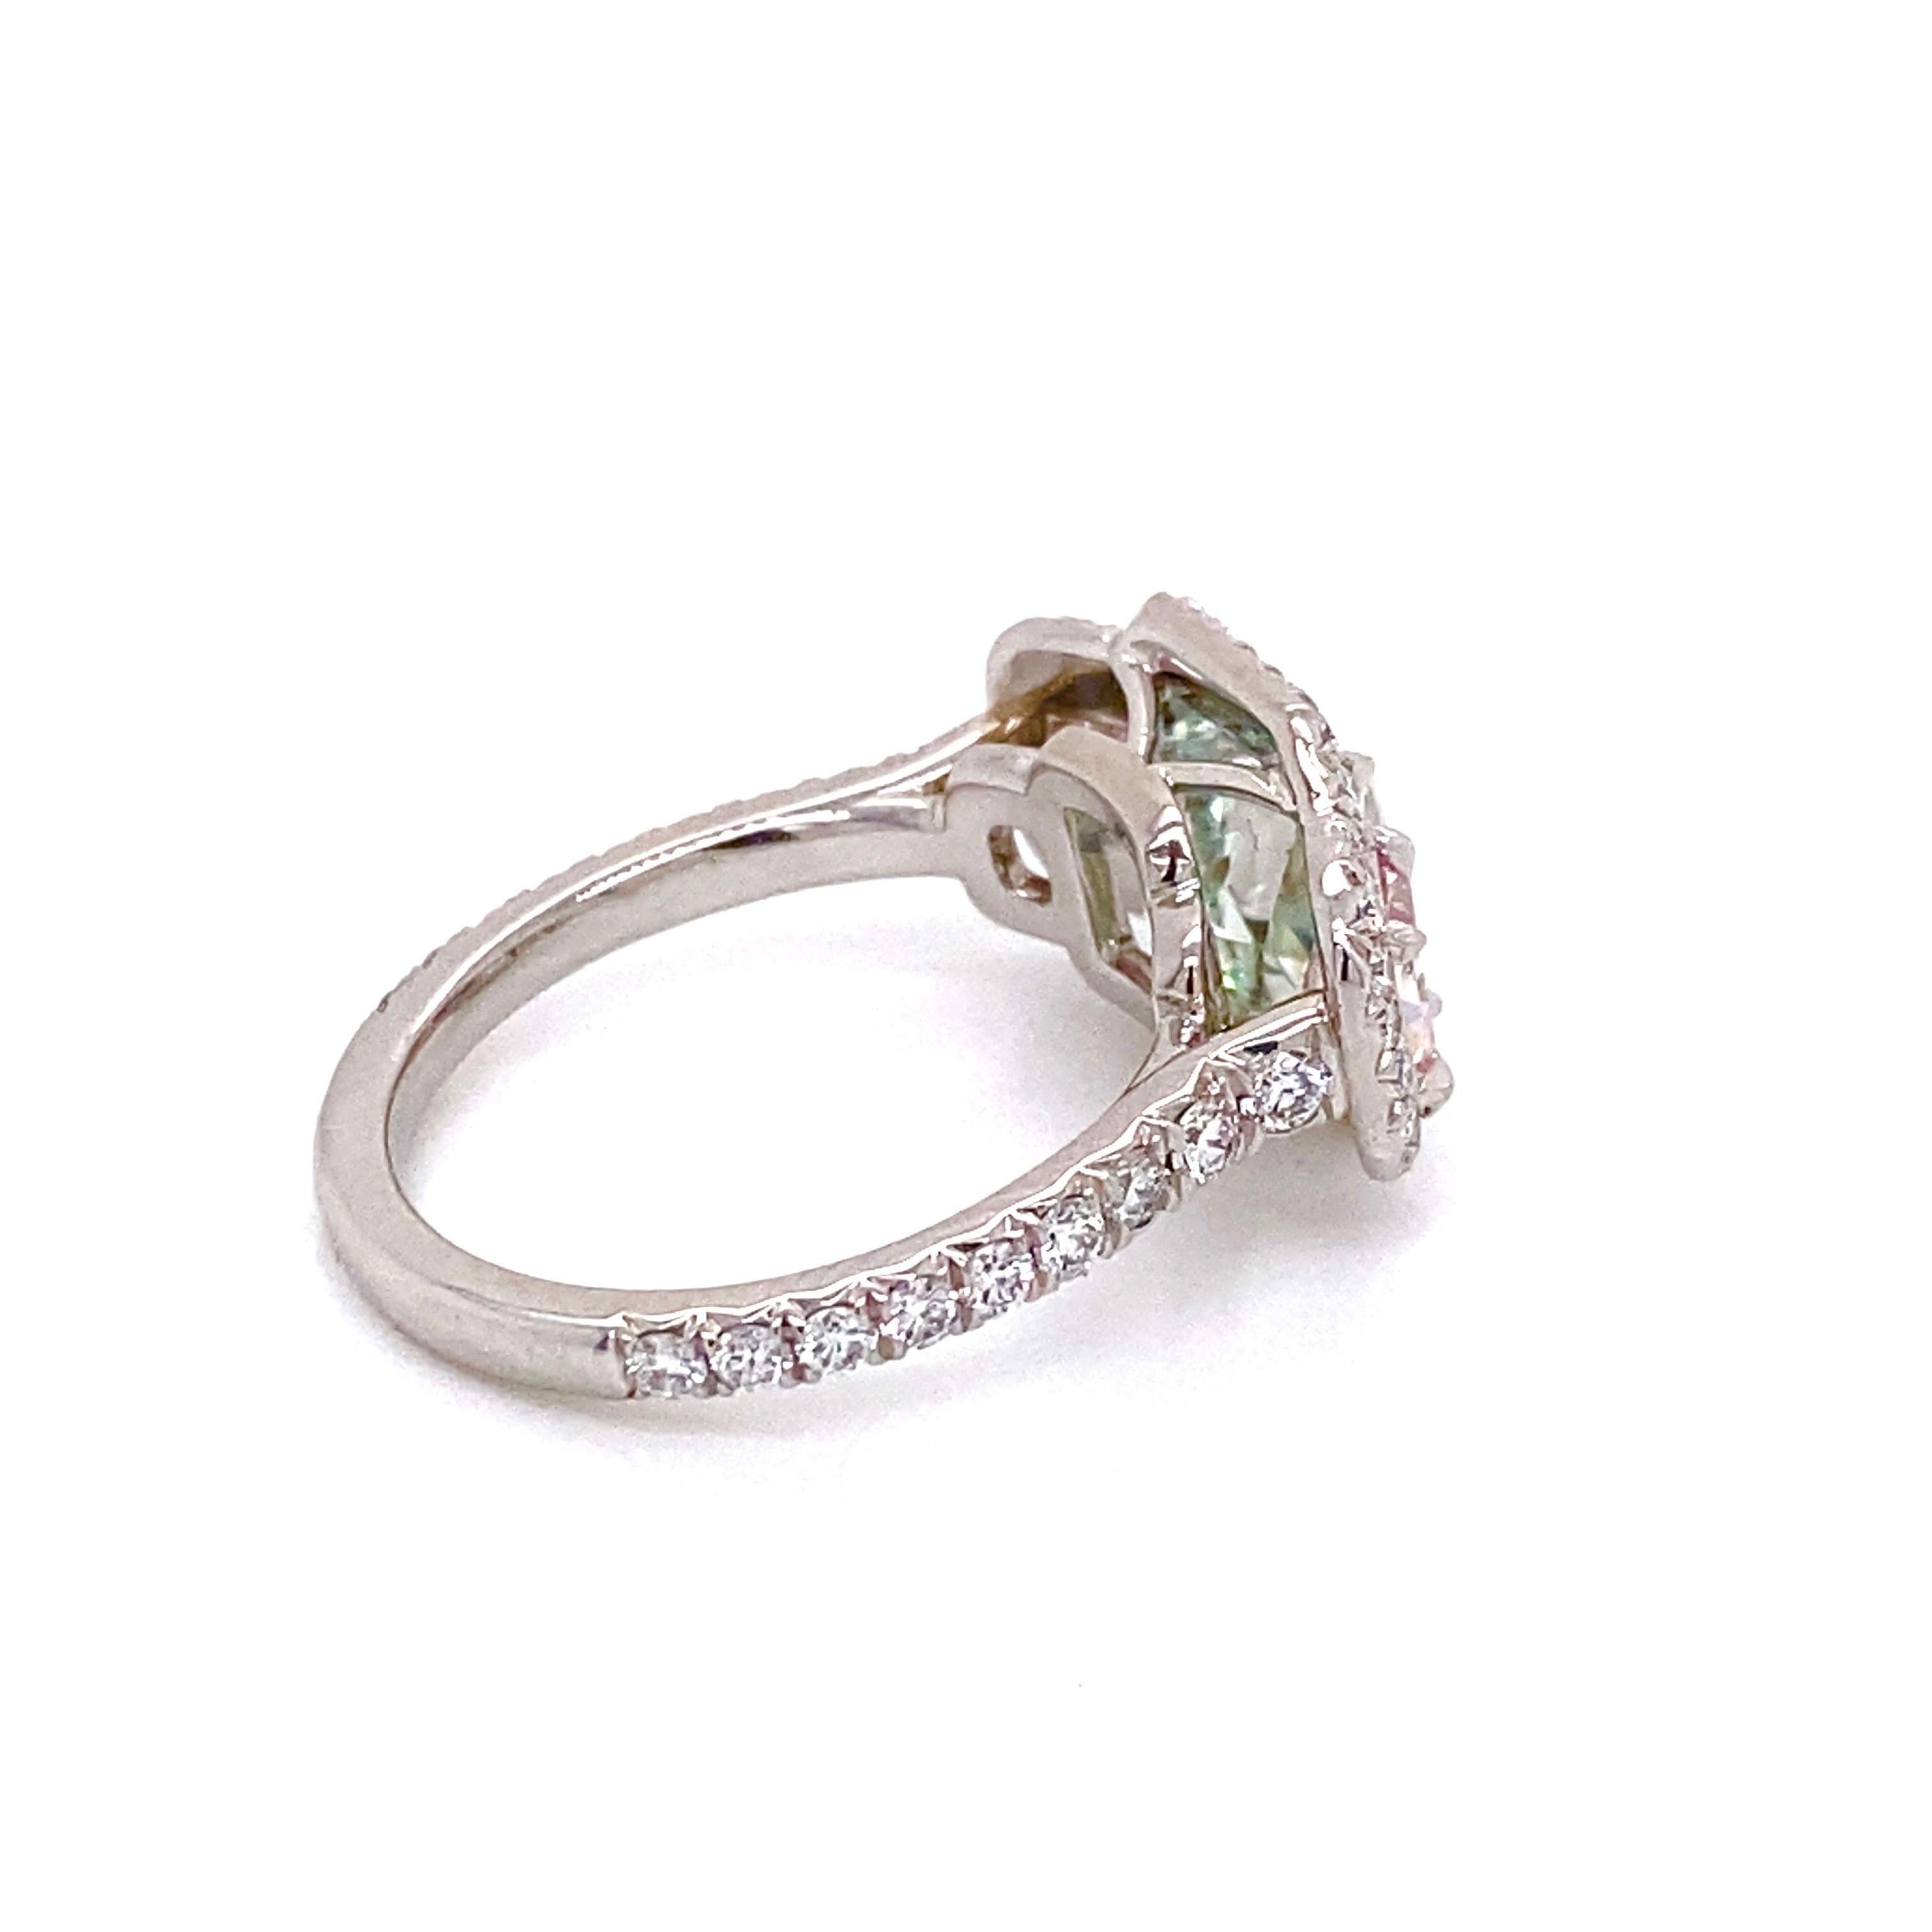 Emilio Jewelry GIA Certified Fancy Intense Pure Green Diamond Ring In New Condition For Sale In New York, NY